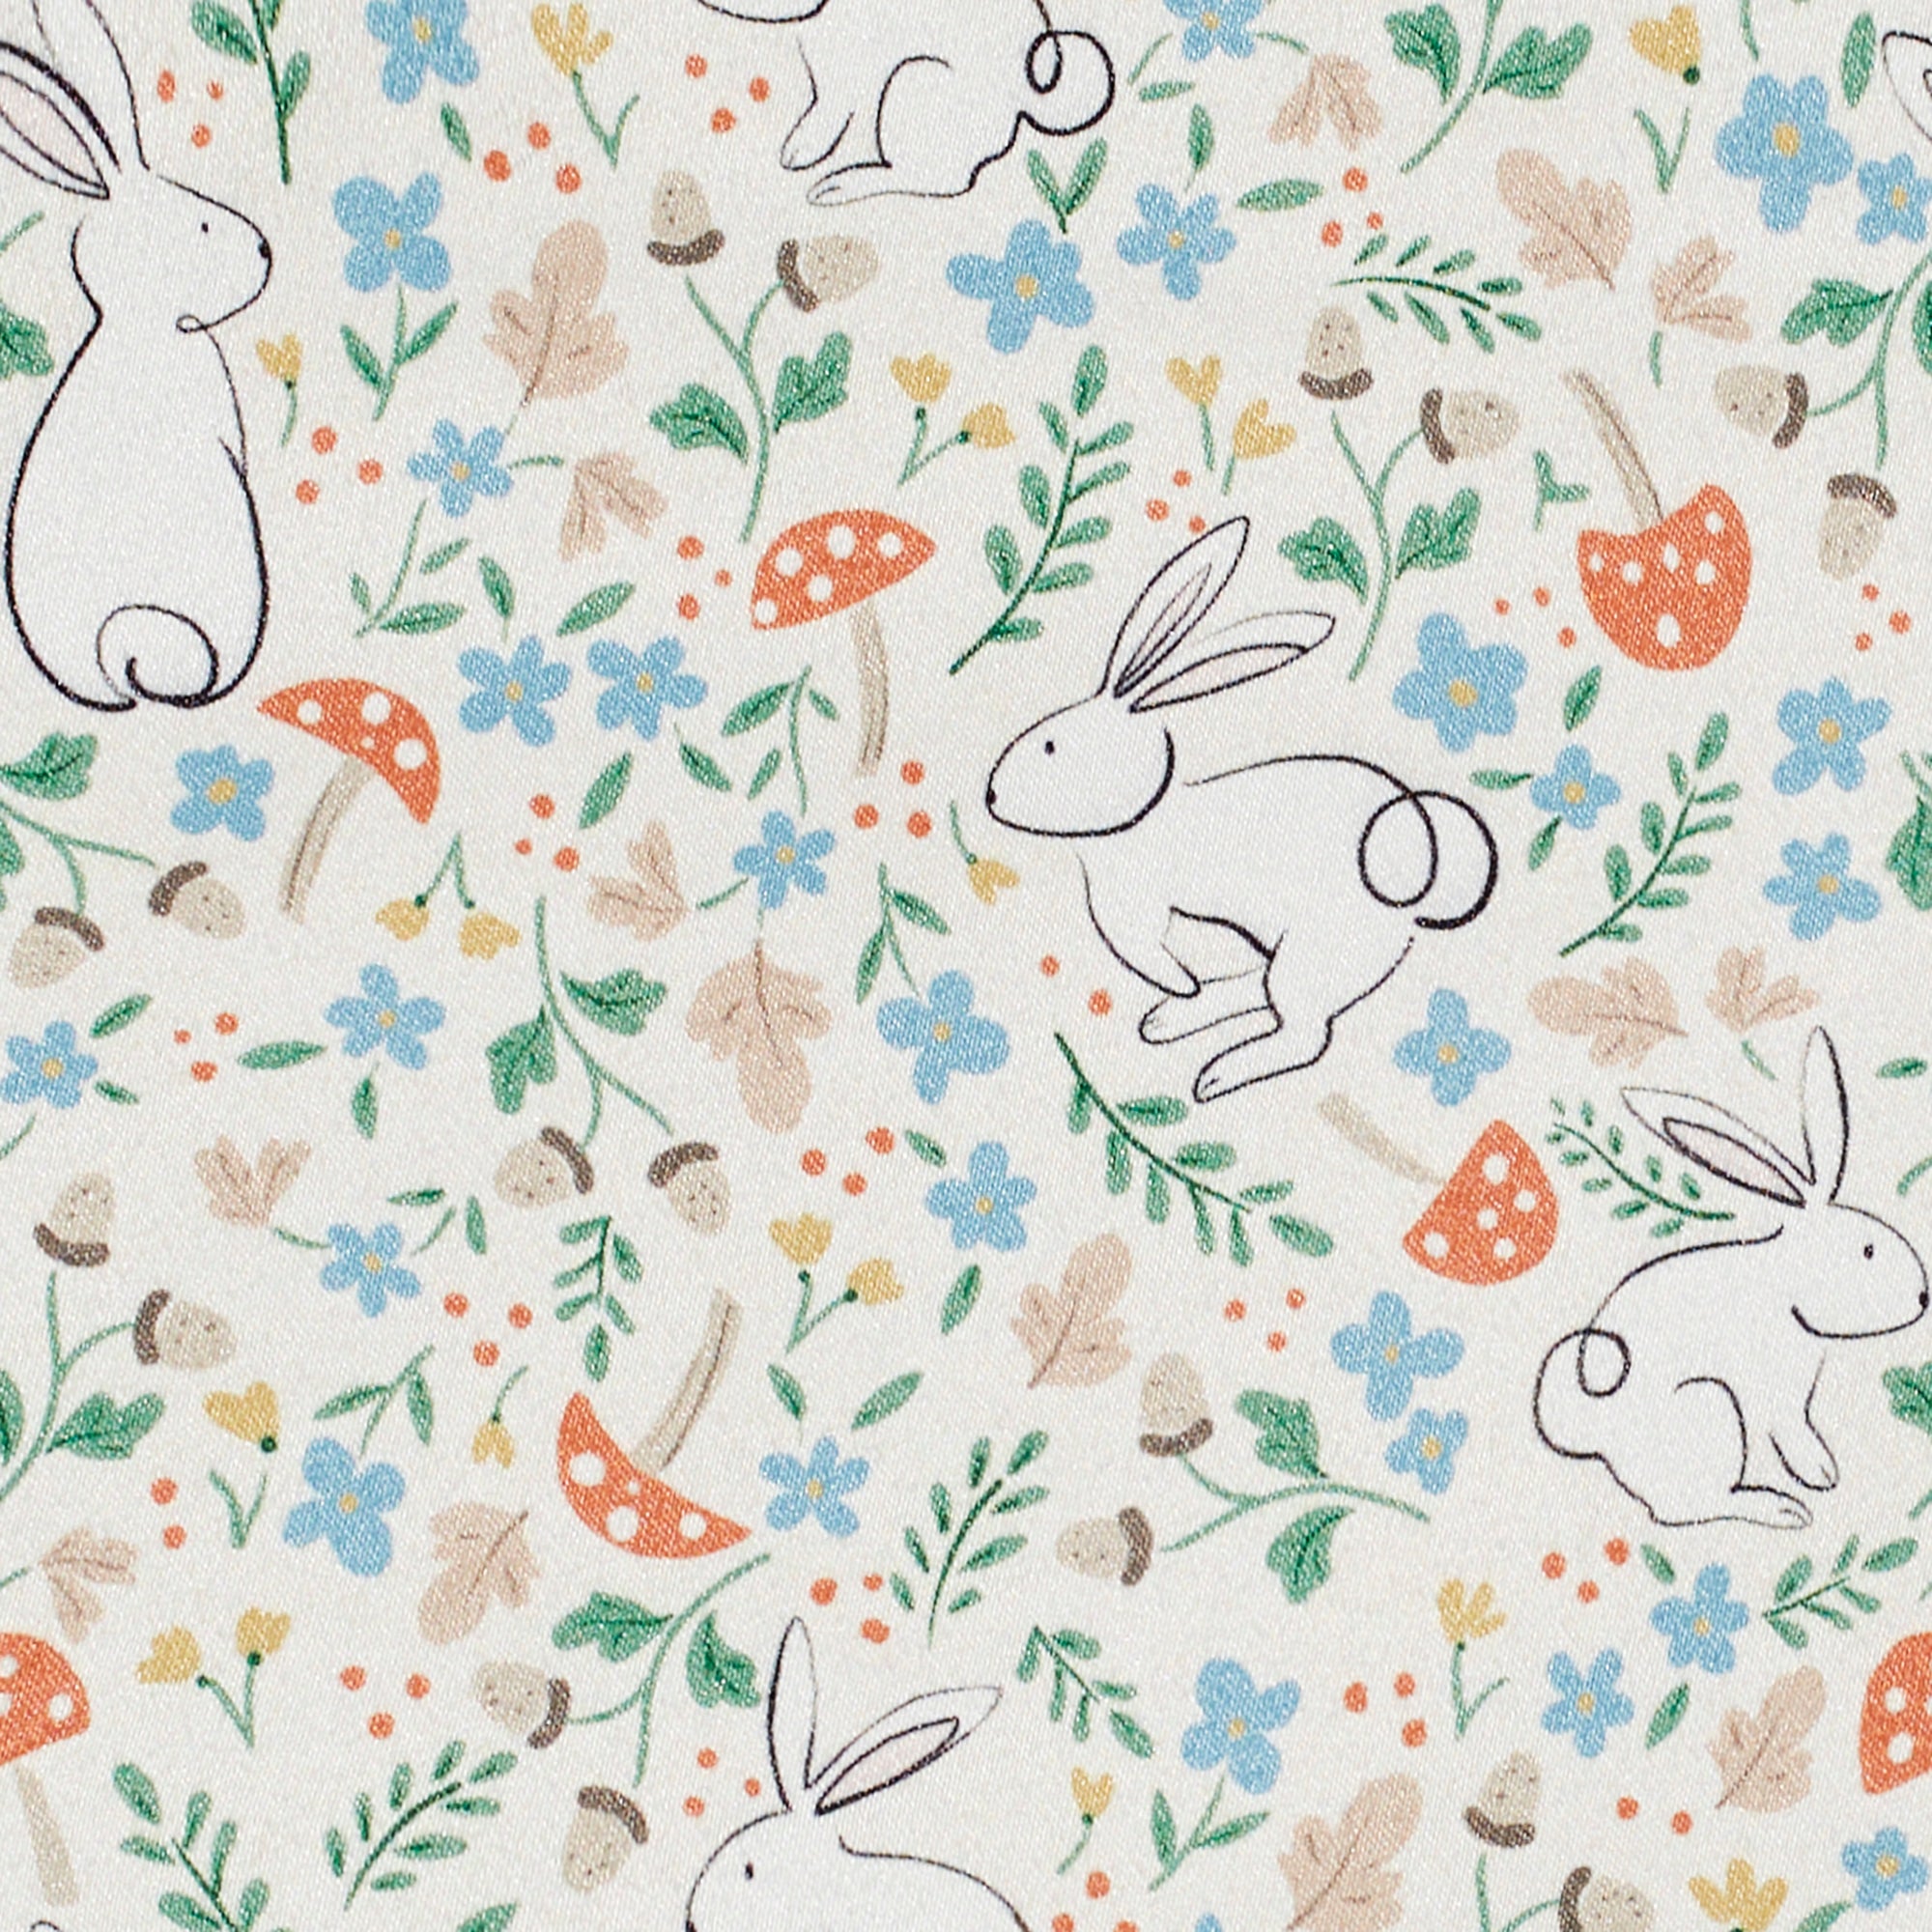 Peek-a-Boo Bunnies Blackout Made to Measure Roller Blind Fabric Sample